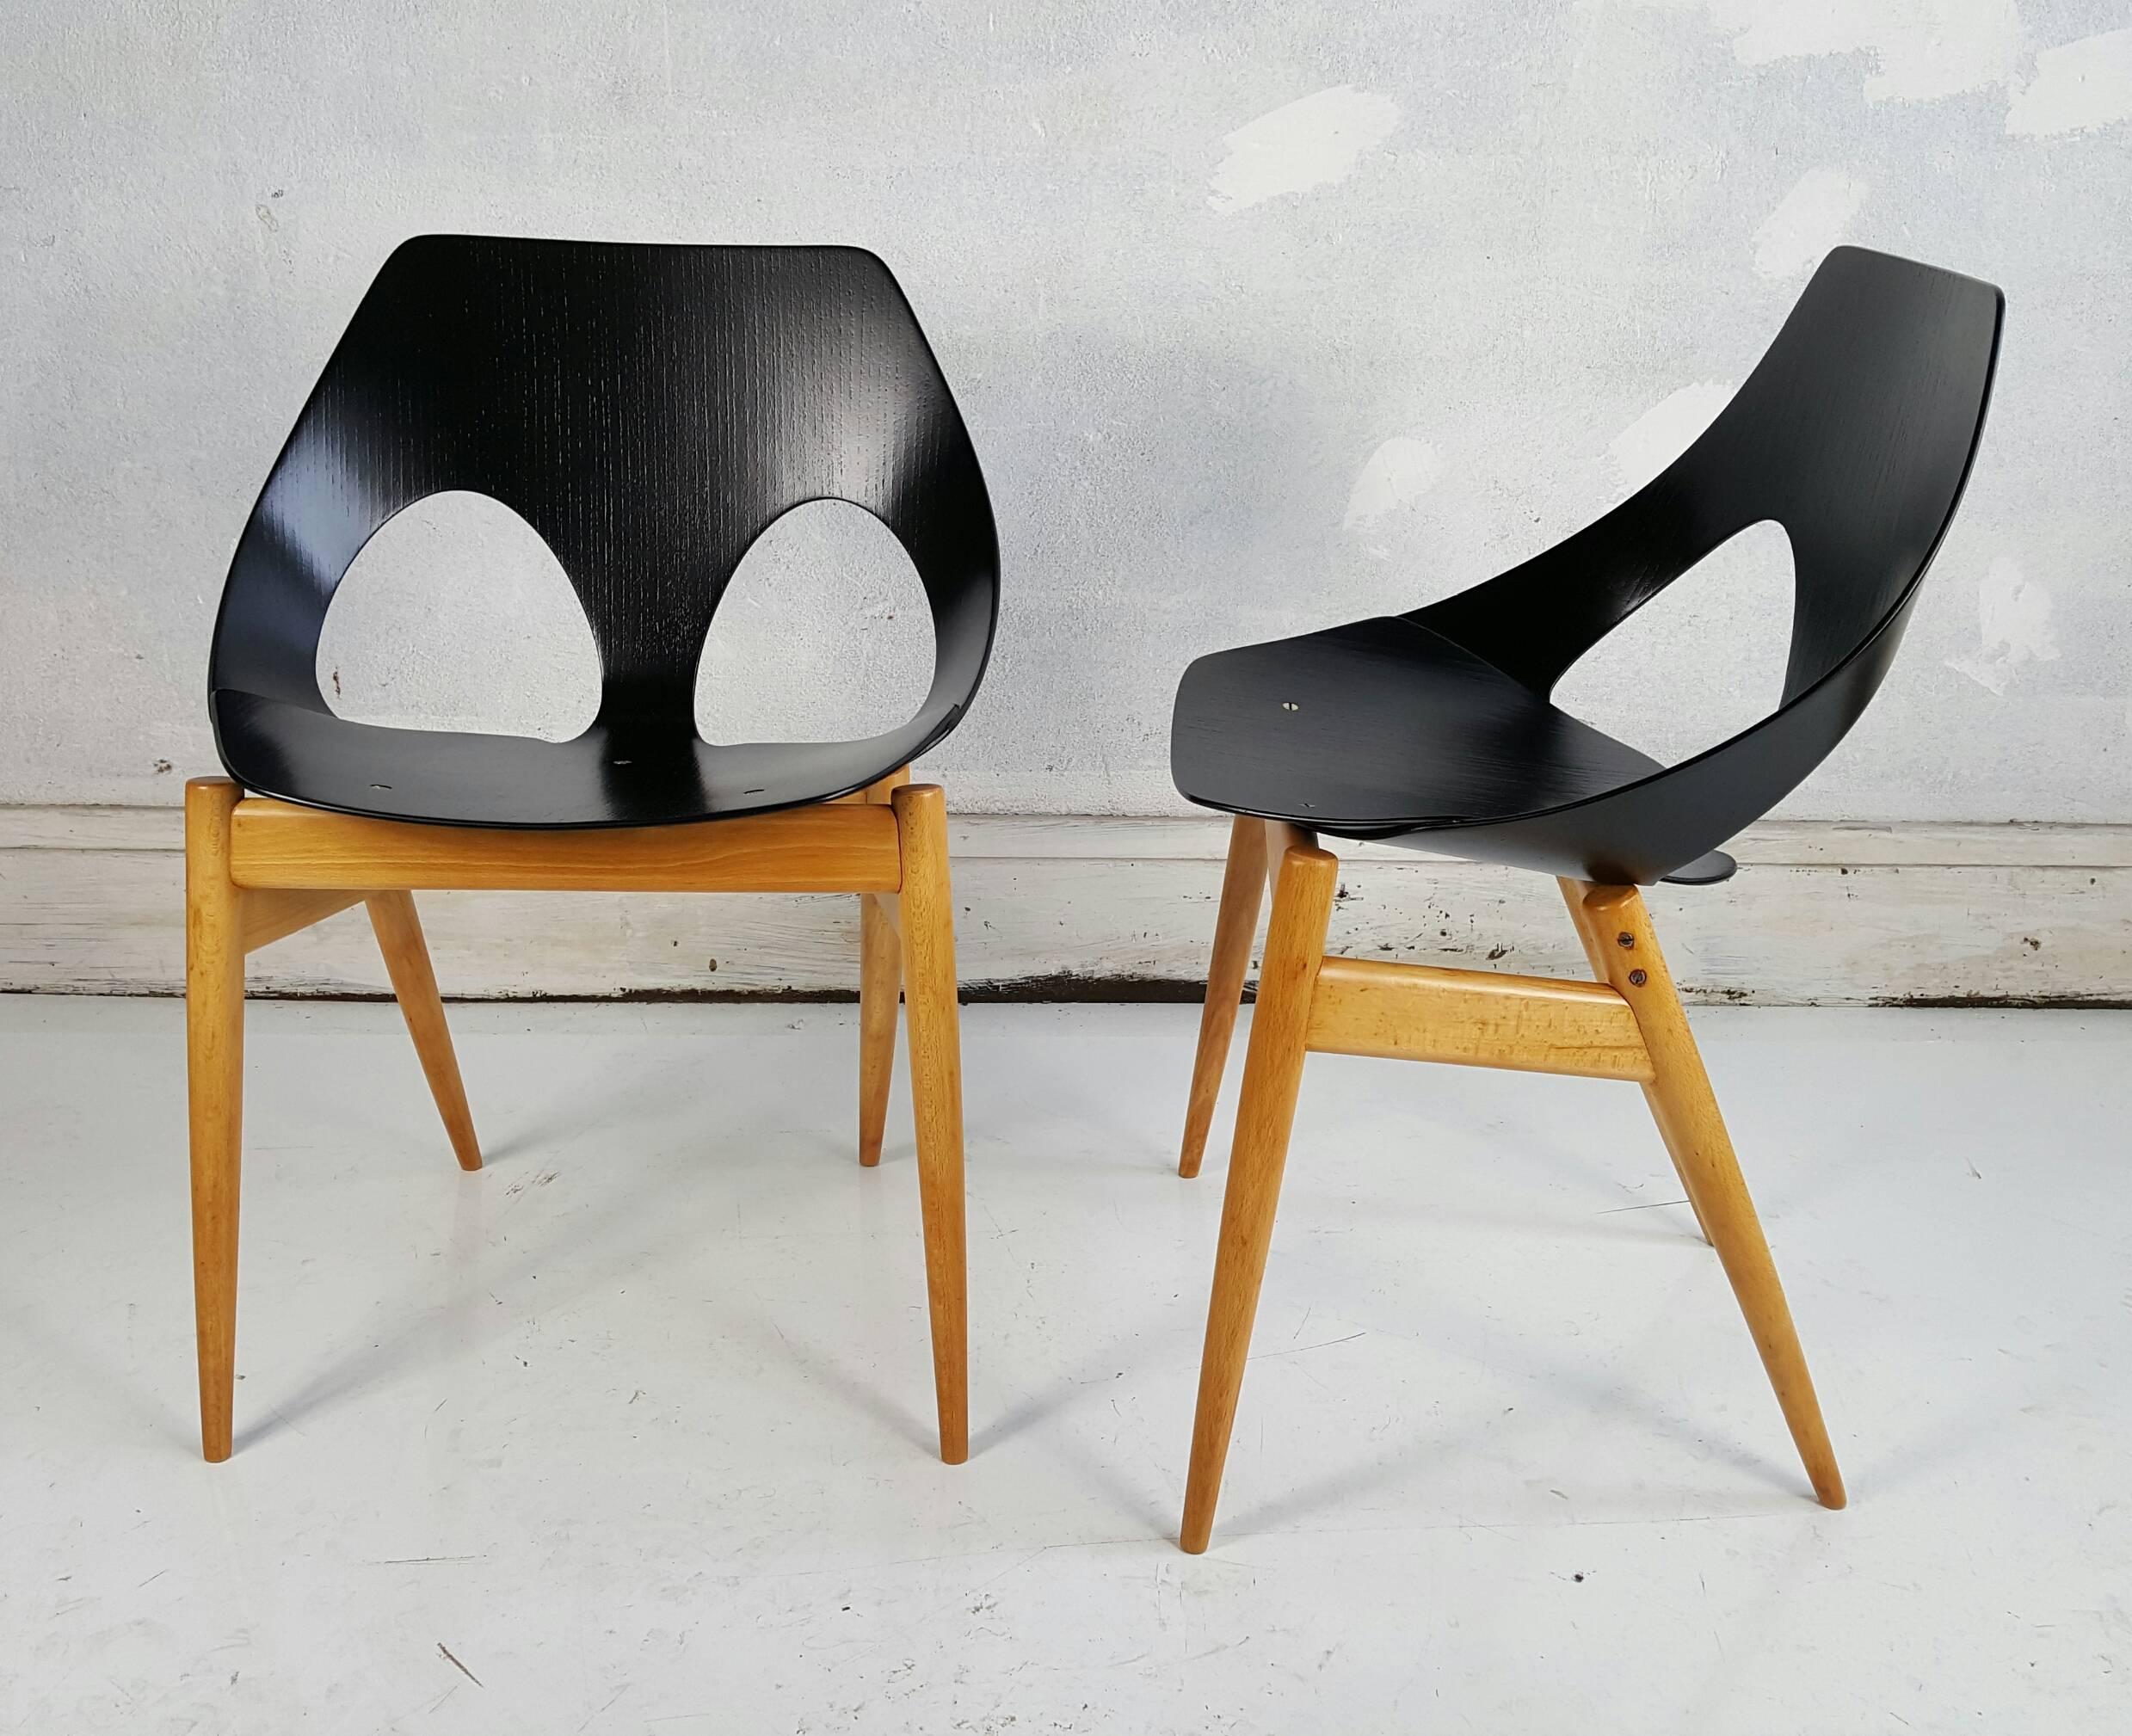 The Jason chair was designed by the Danish designer Carl Jacobs but was manufactured by Kandya, a British firm. This lightweight, stackable, chair has gently tapering splayed wooden legs that are typical of Danish design of the period. The seat and